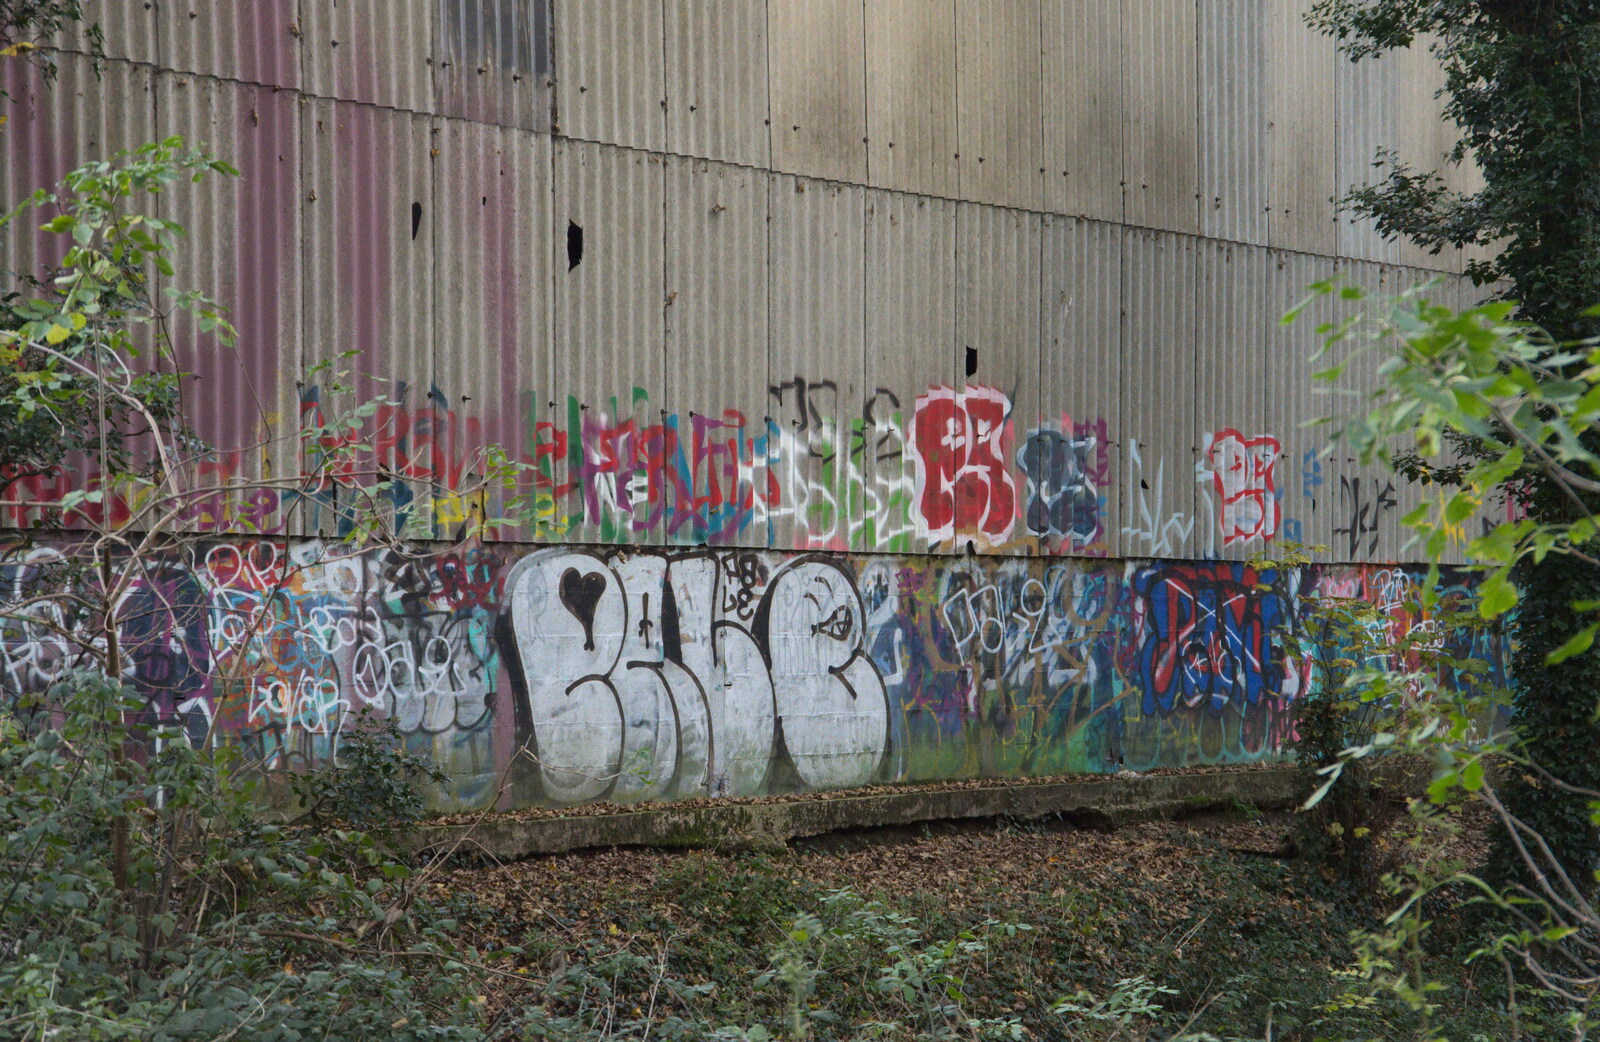 Graffiti on the chicken factory's shed from The Dereliction of Eye, Suffolk - 22nd November 2020